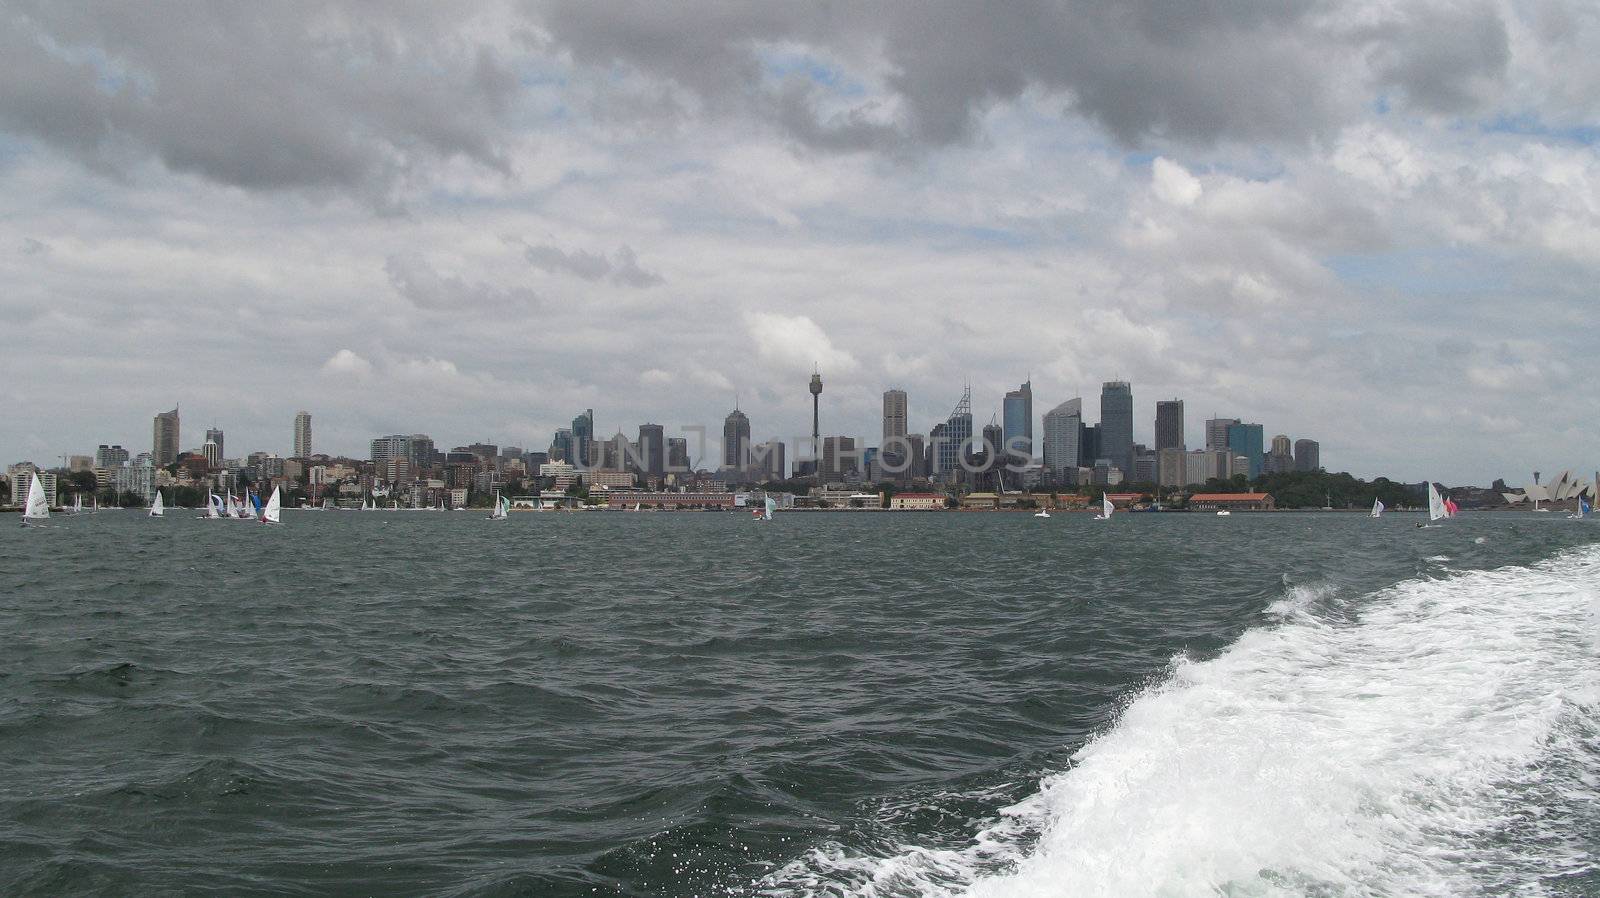 view of the Sydney skyline with skyscrapers, australia